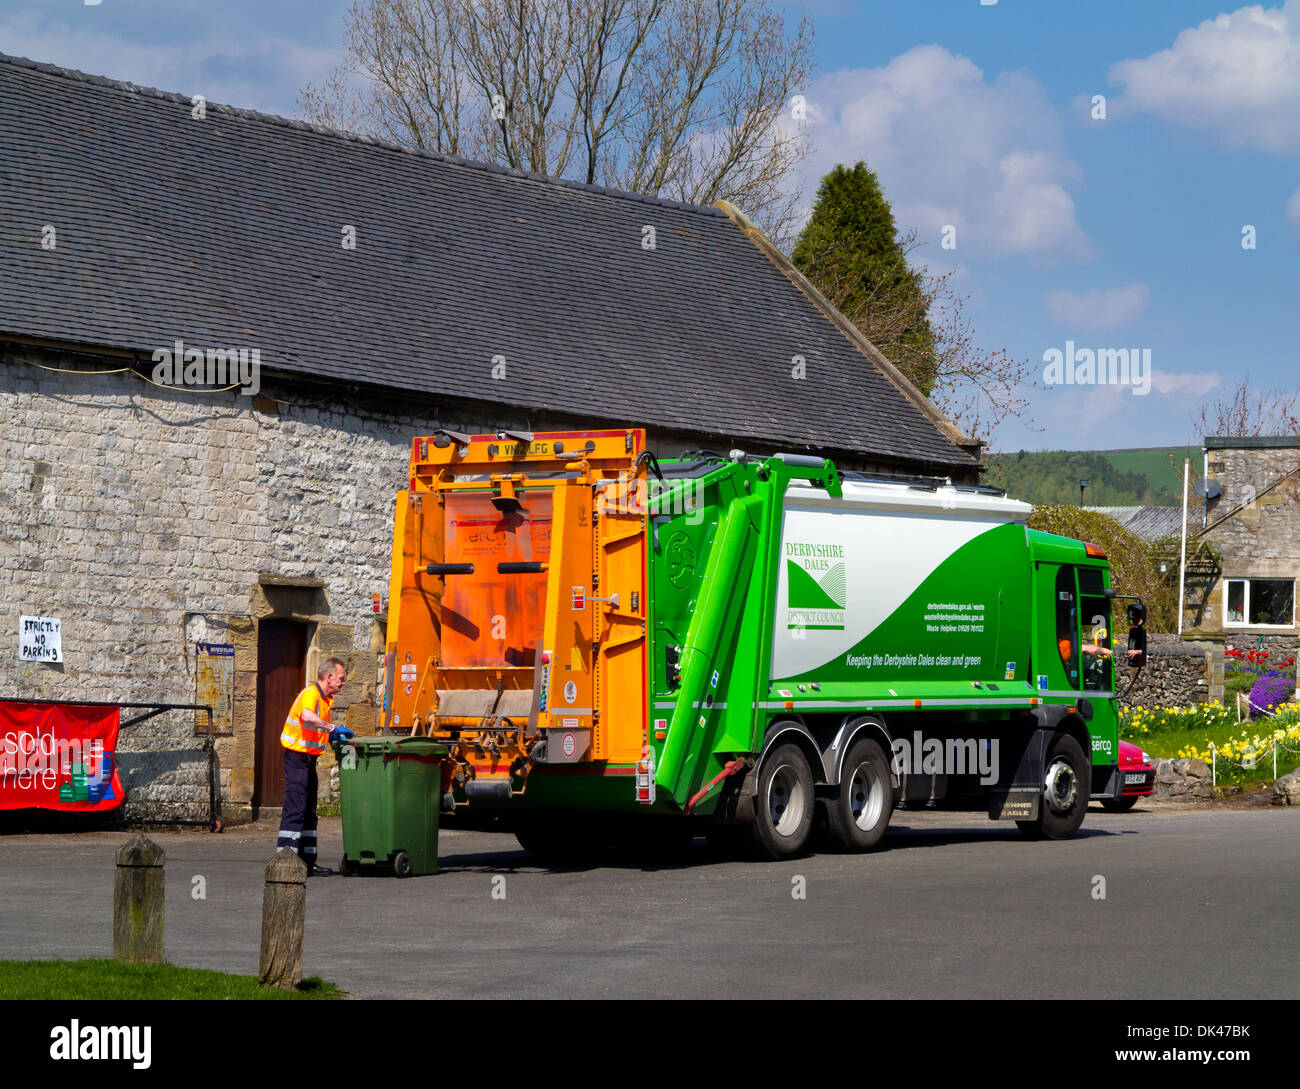 Serco outsourced dustcart with refuse collector operated on behalf of Derbyshire Dales District Council Hartington Derbyshire UK Stock Photo